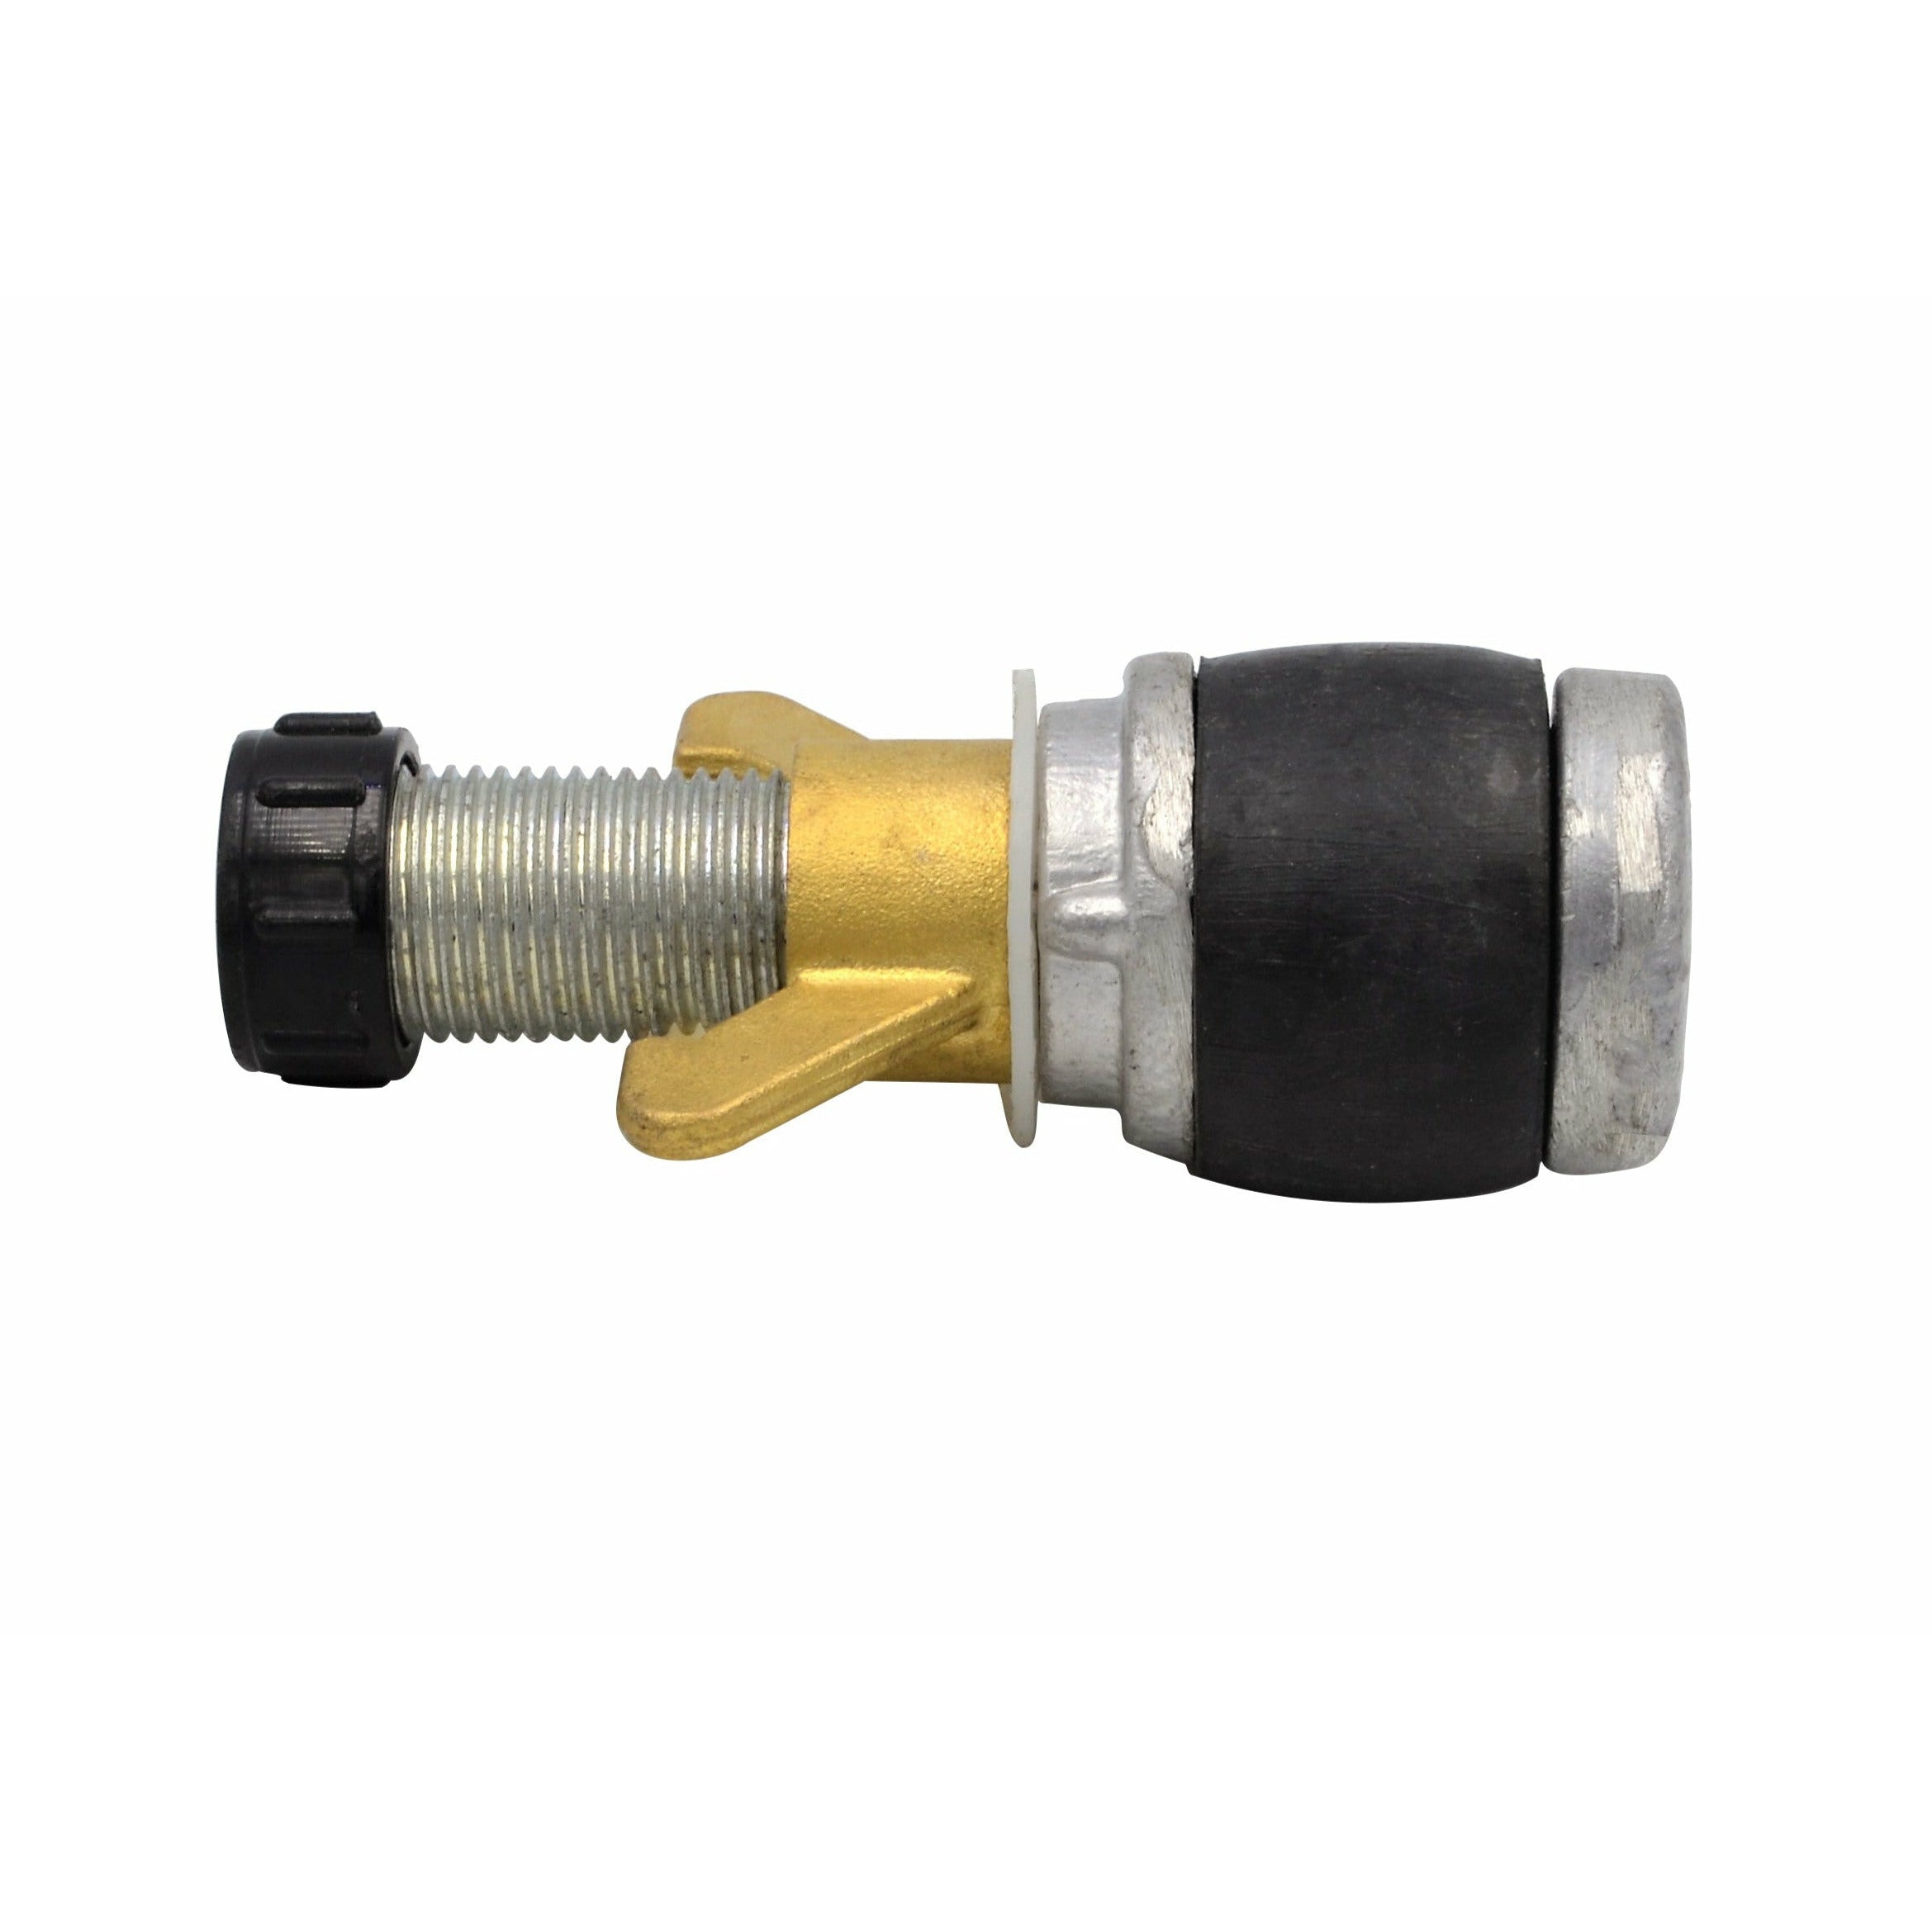 Aluminium Alloy pipe expanding plug with 13 mm bypass 38mm-50mm 203 MPA 038-13